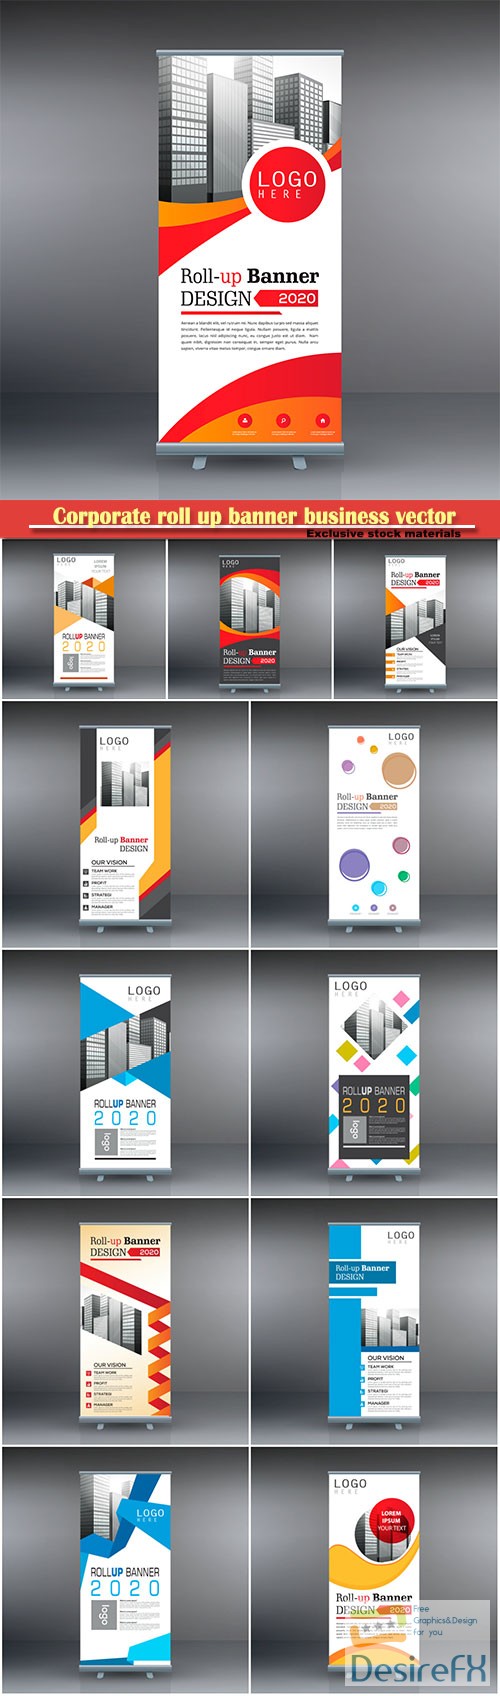 Corporate roll up banner business vector template # 2